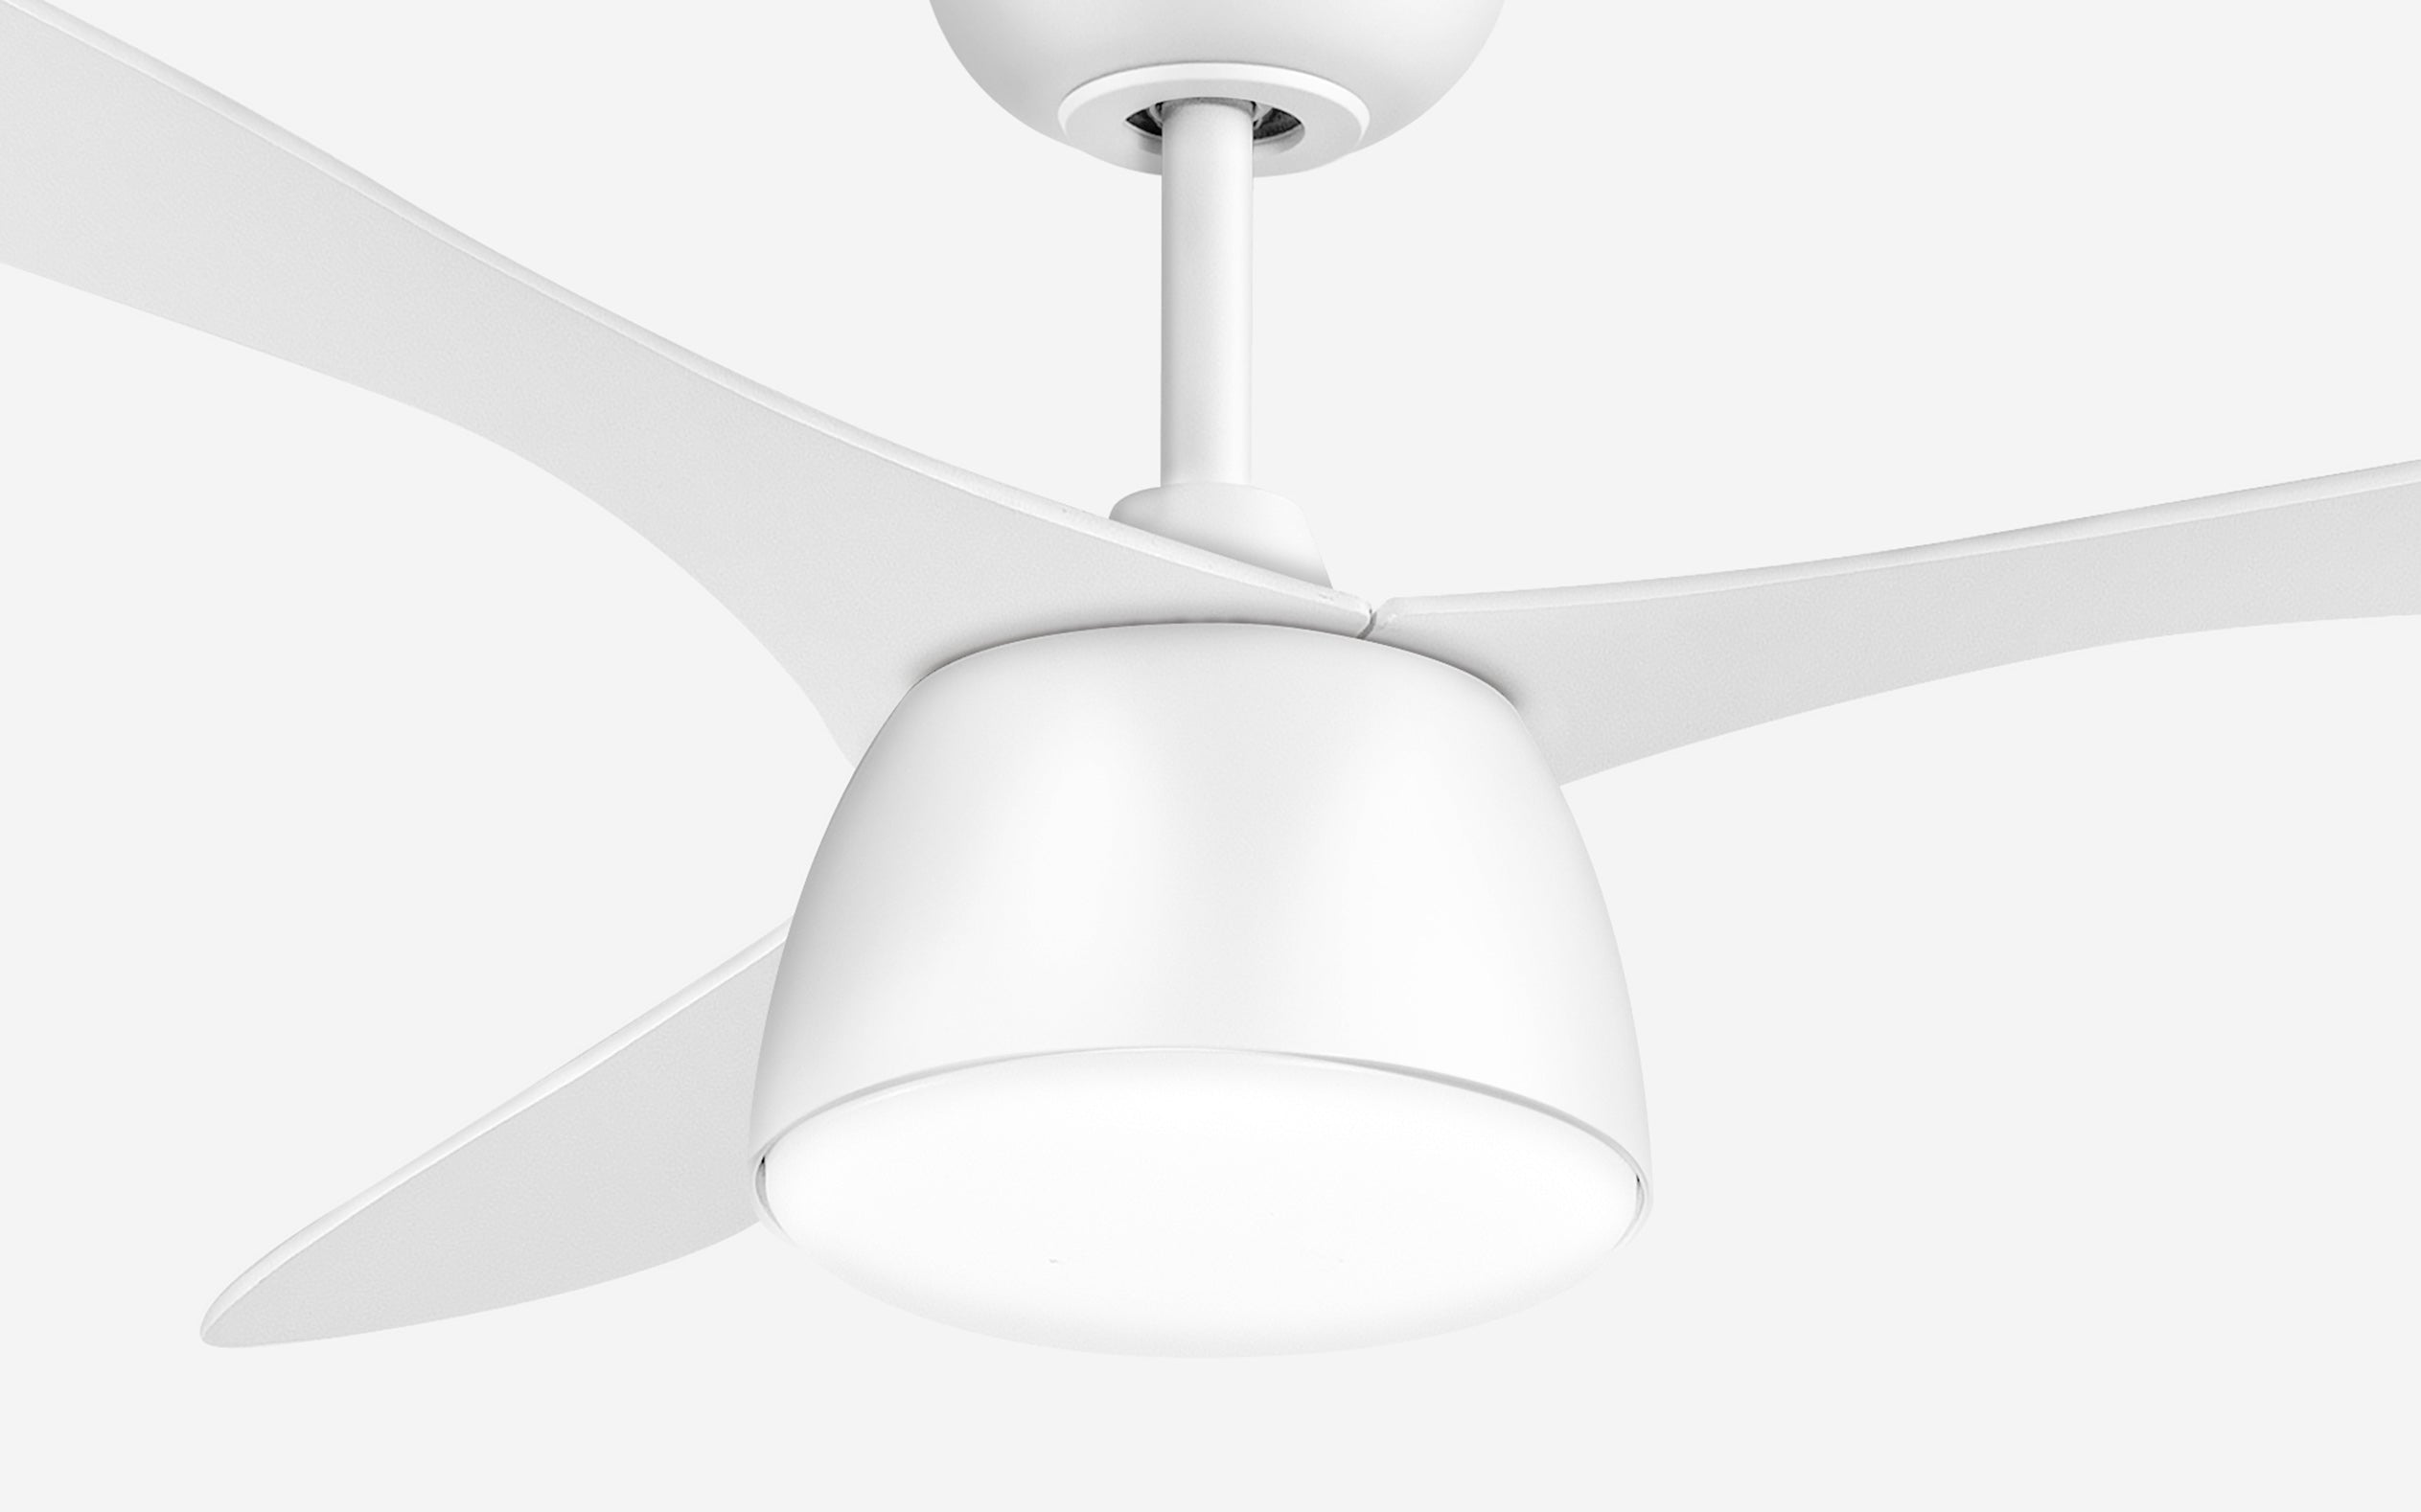 Pebbel Storm Ceiling Fan - #Body Color_White|Blade Color_White|Blade Size_56"